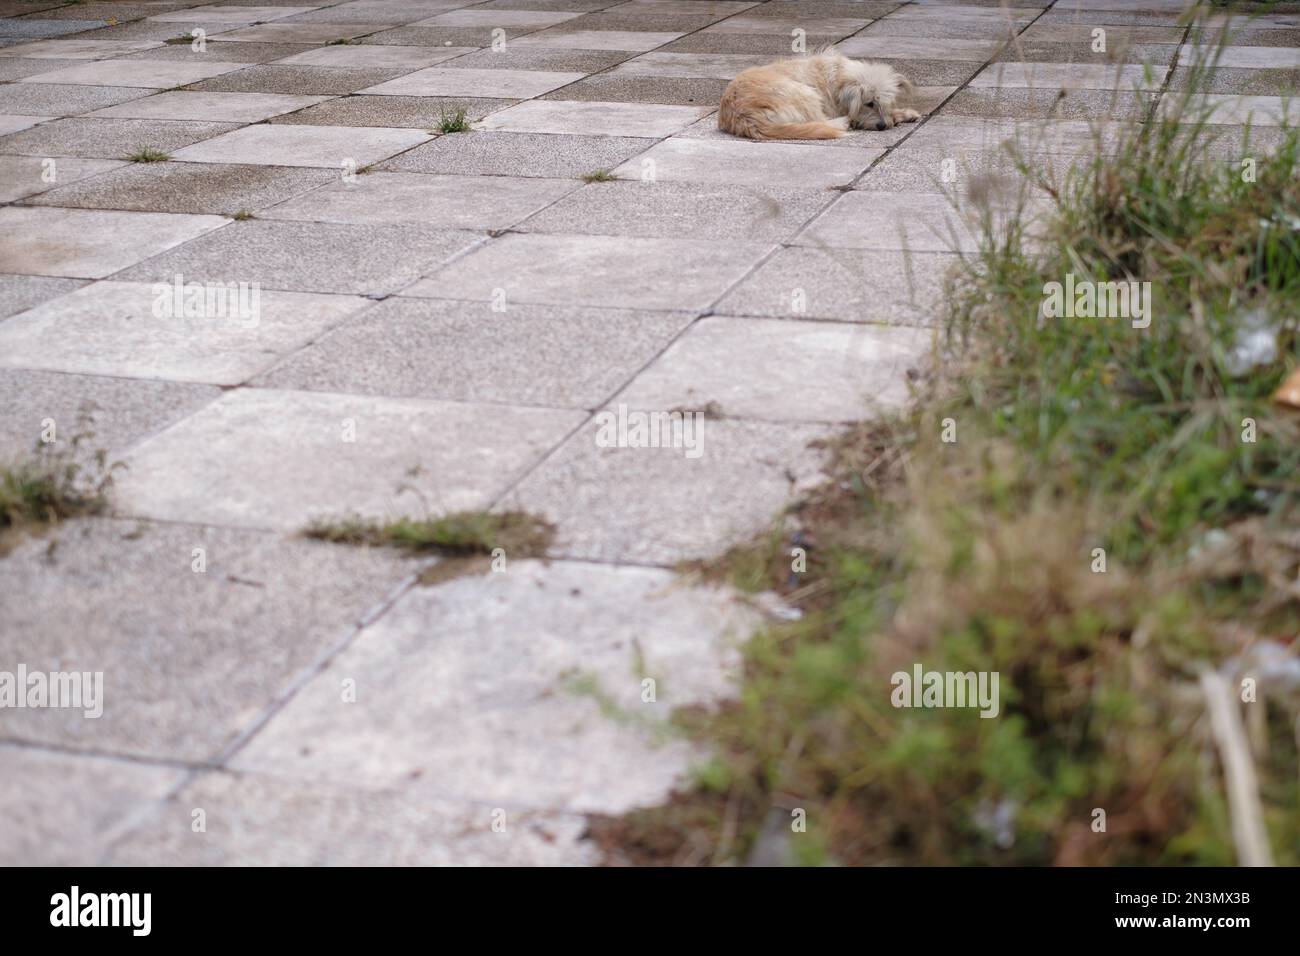 Lonely stray dog takes a nap on a deserted street Stock Photo